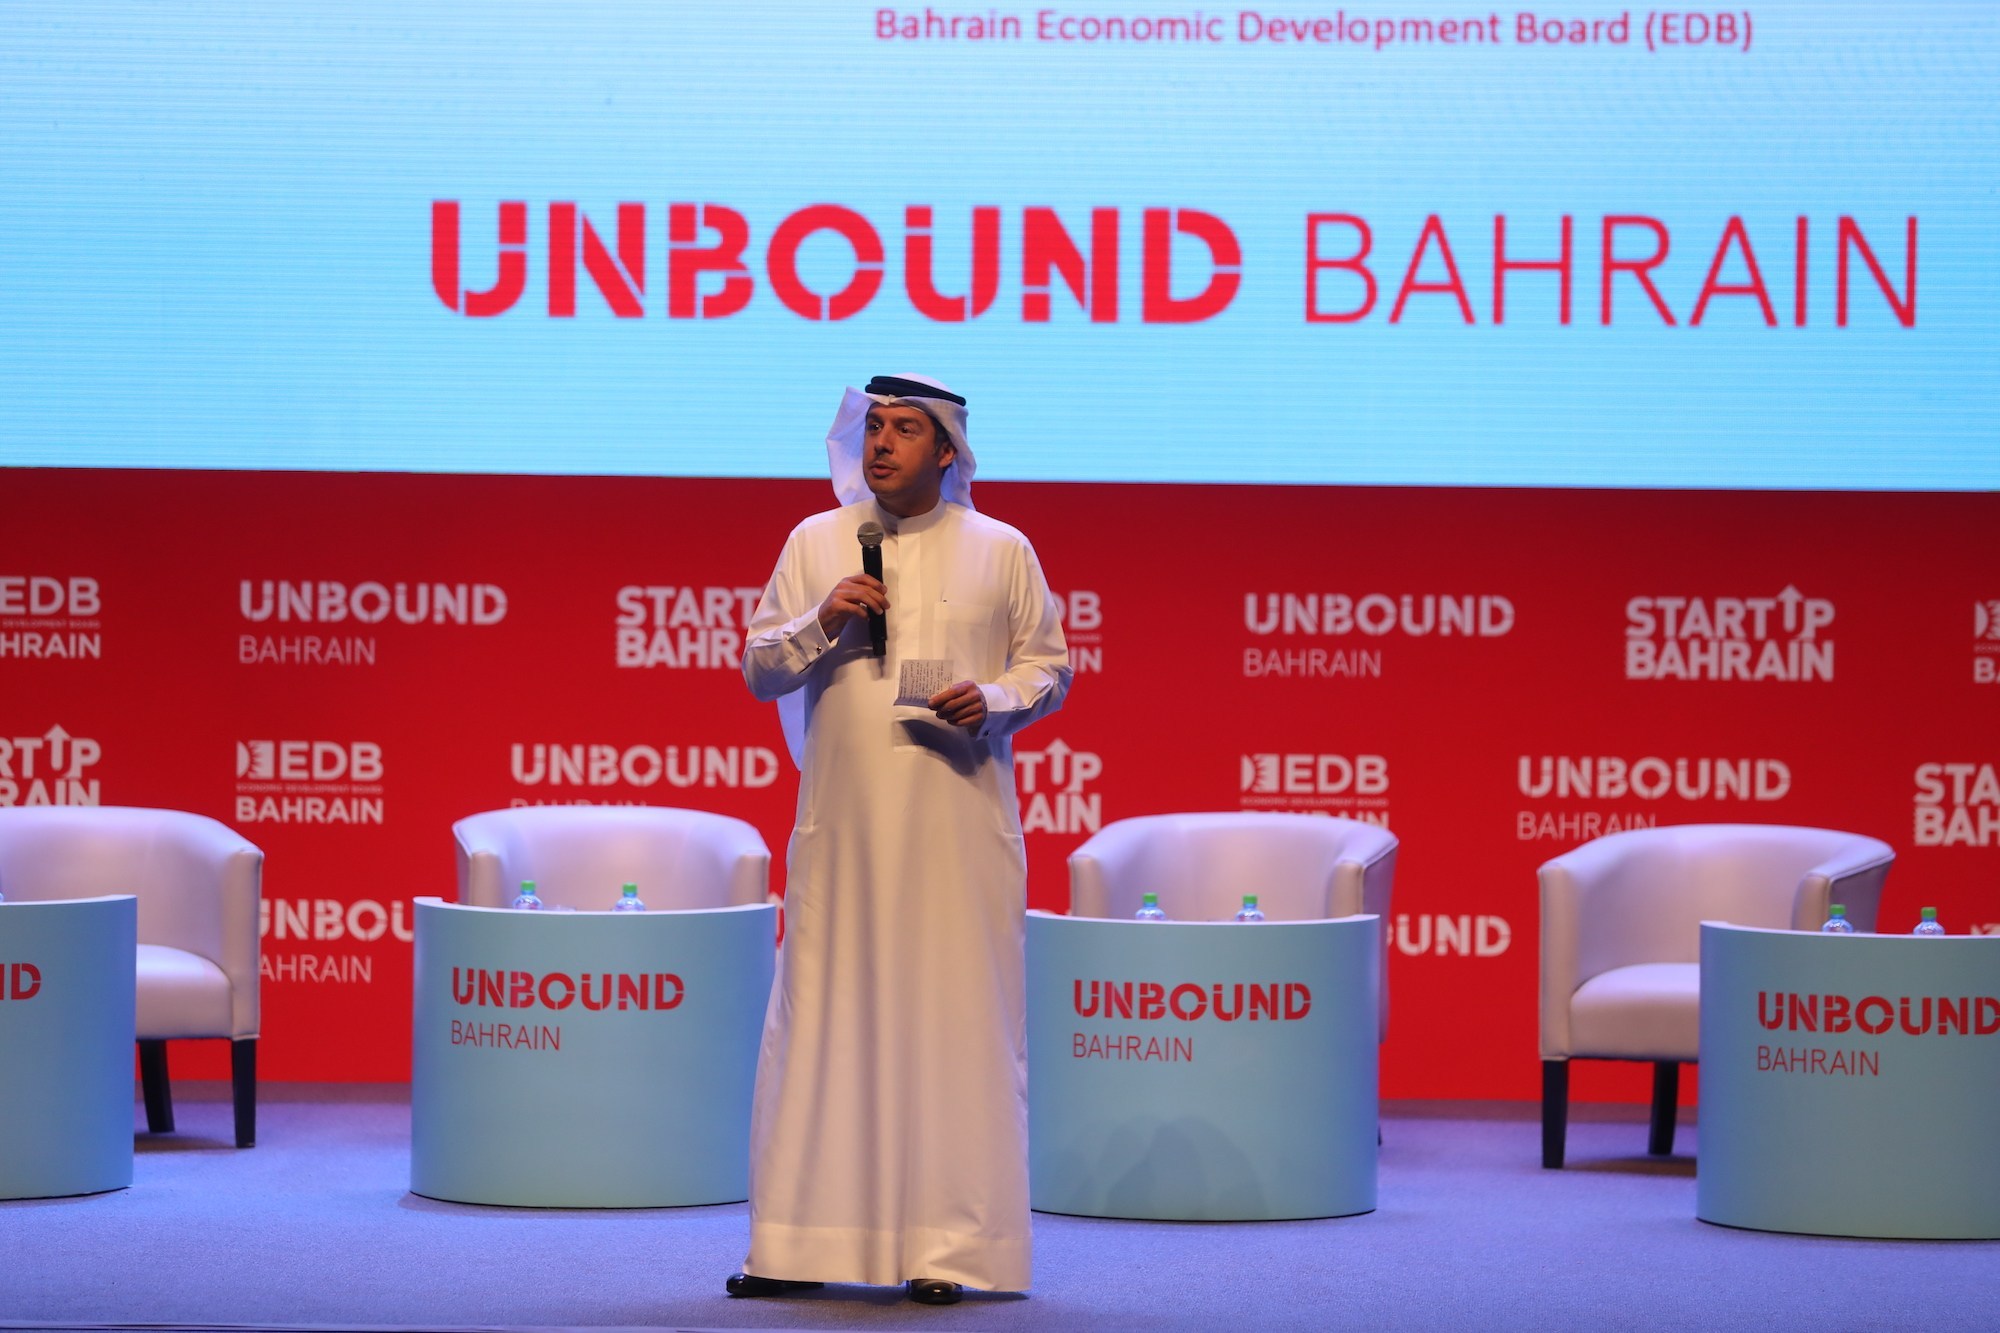 Unbound Bahrain was one heck of a ride, heres a summary of what went down